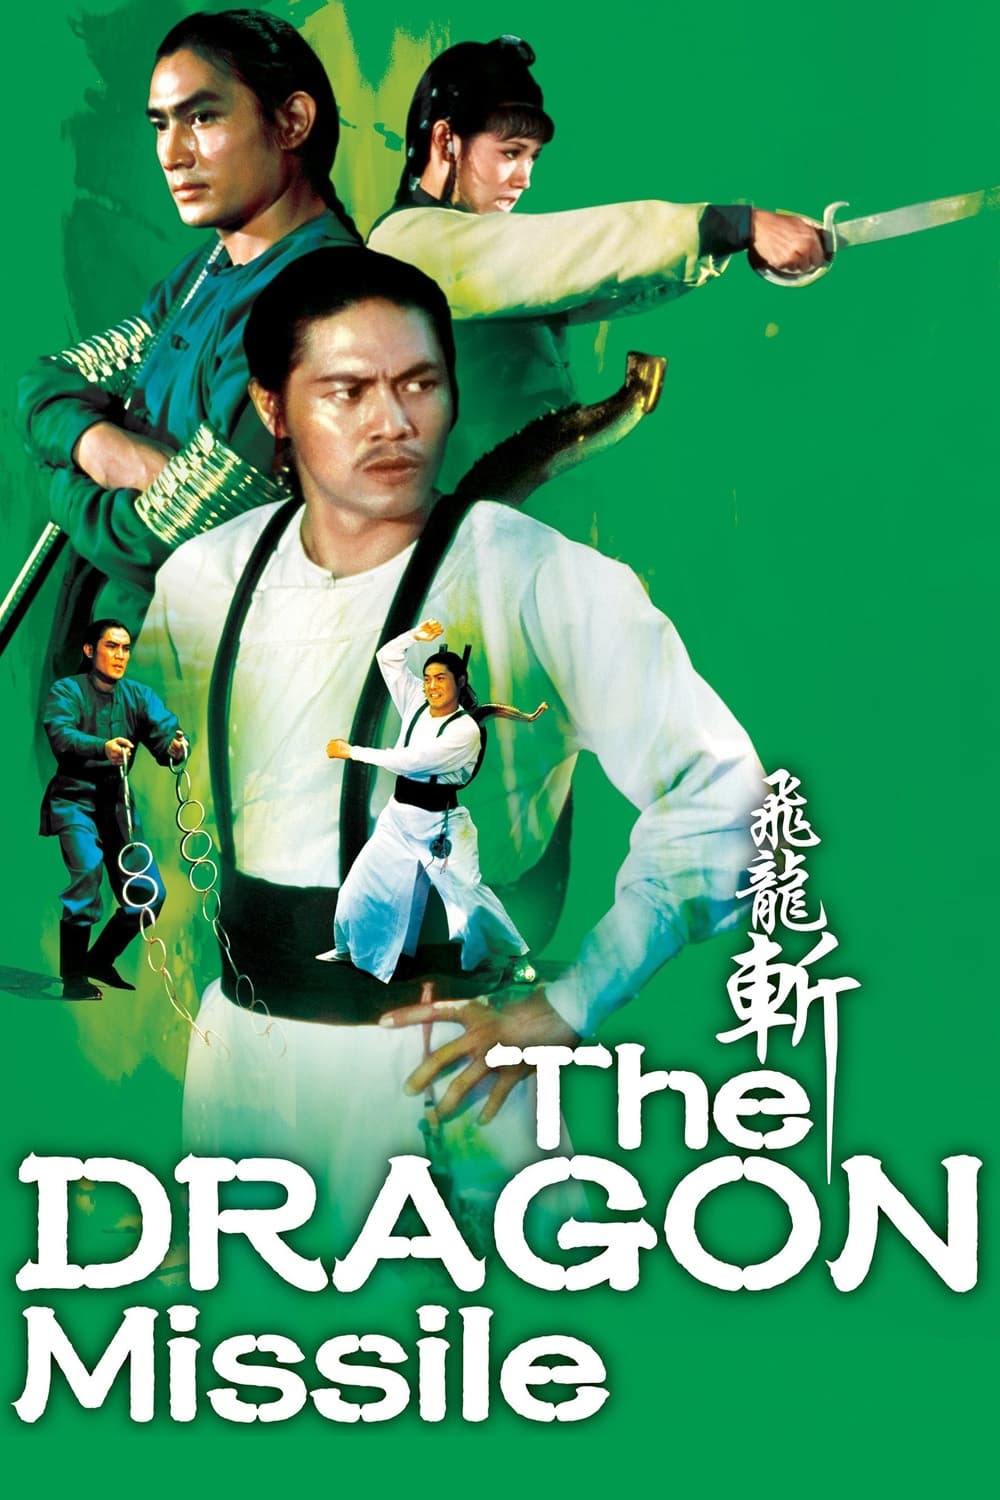 The Dragon Missile (1976)